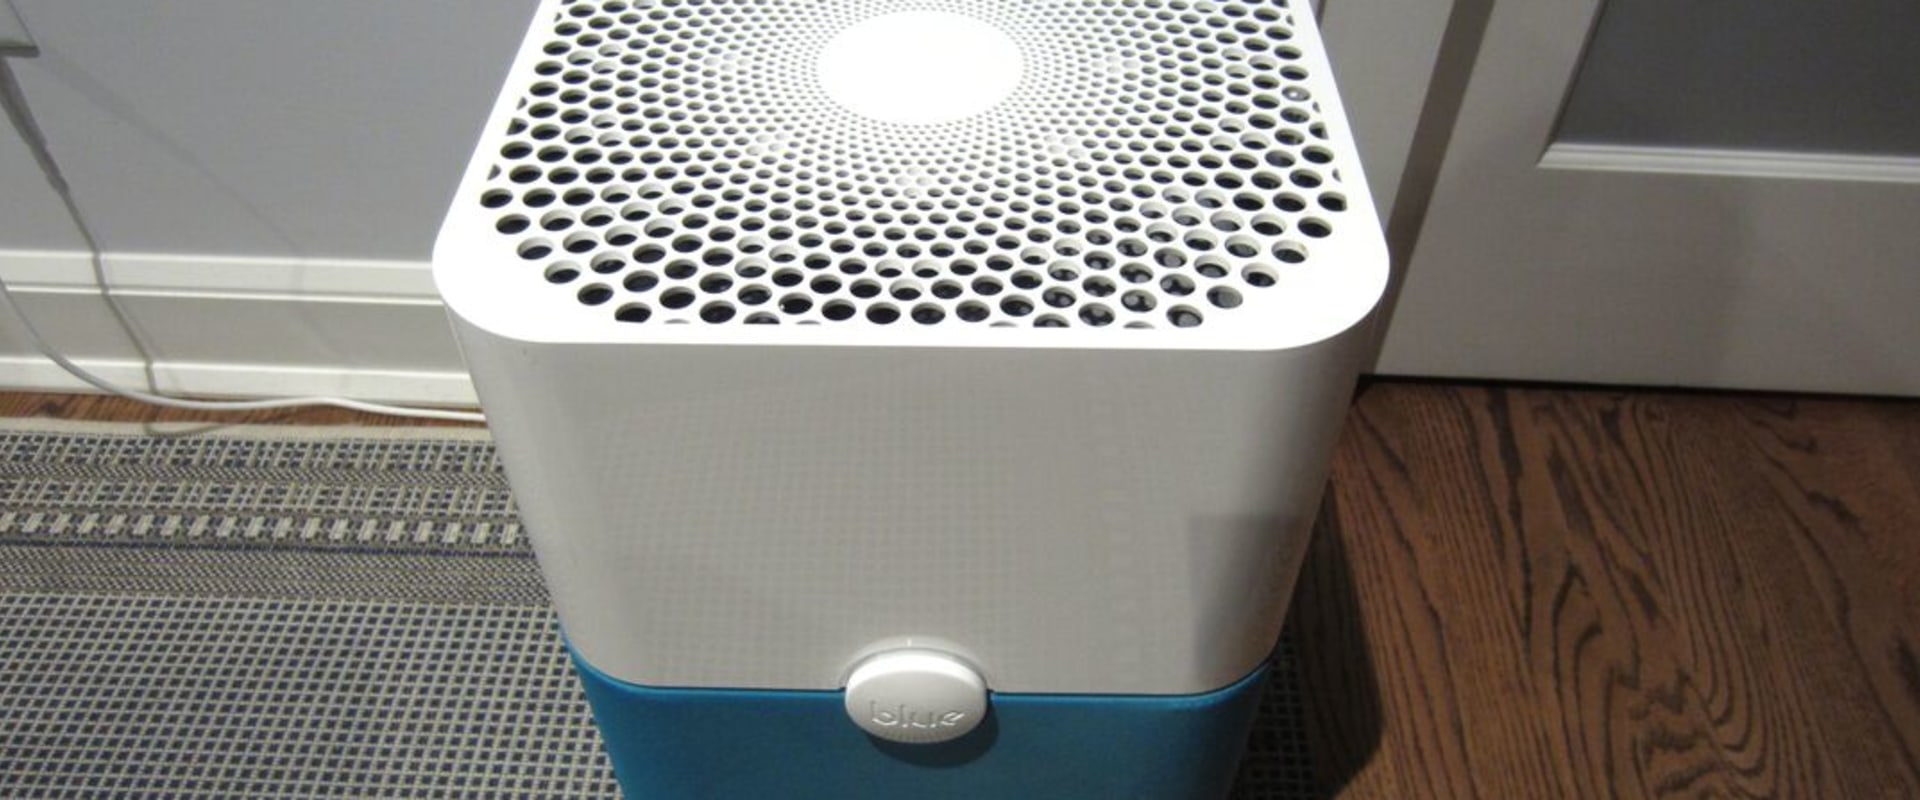 Discover Clean Living: AC Ionizer Air Purifier Installation Services in Palmetto Bay FL